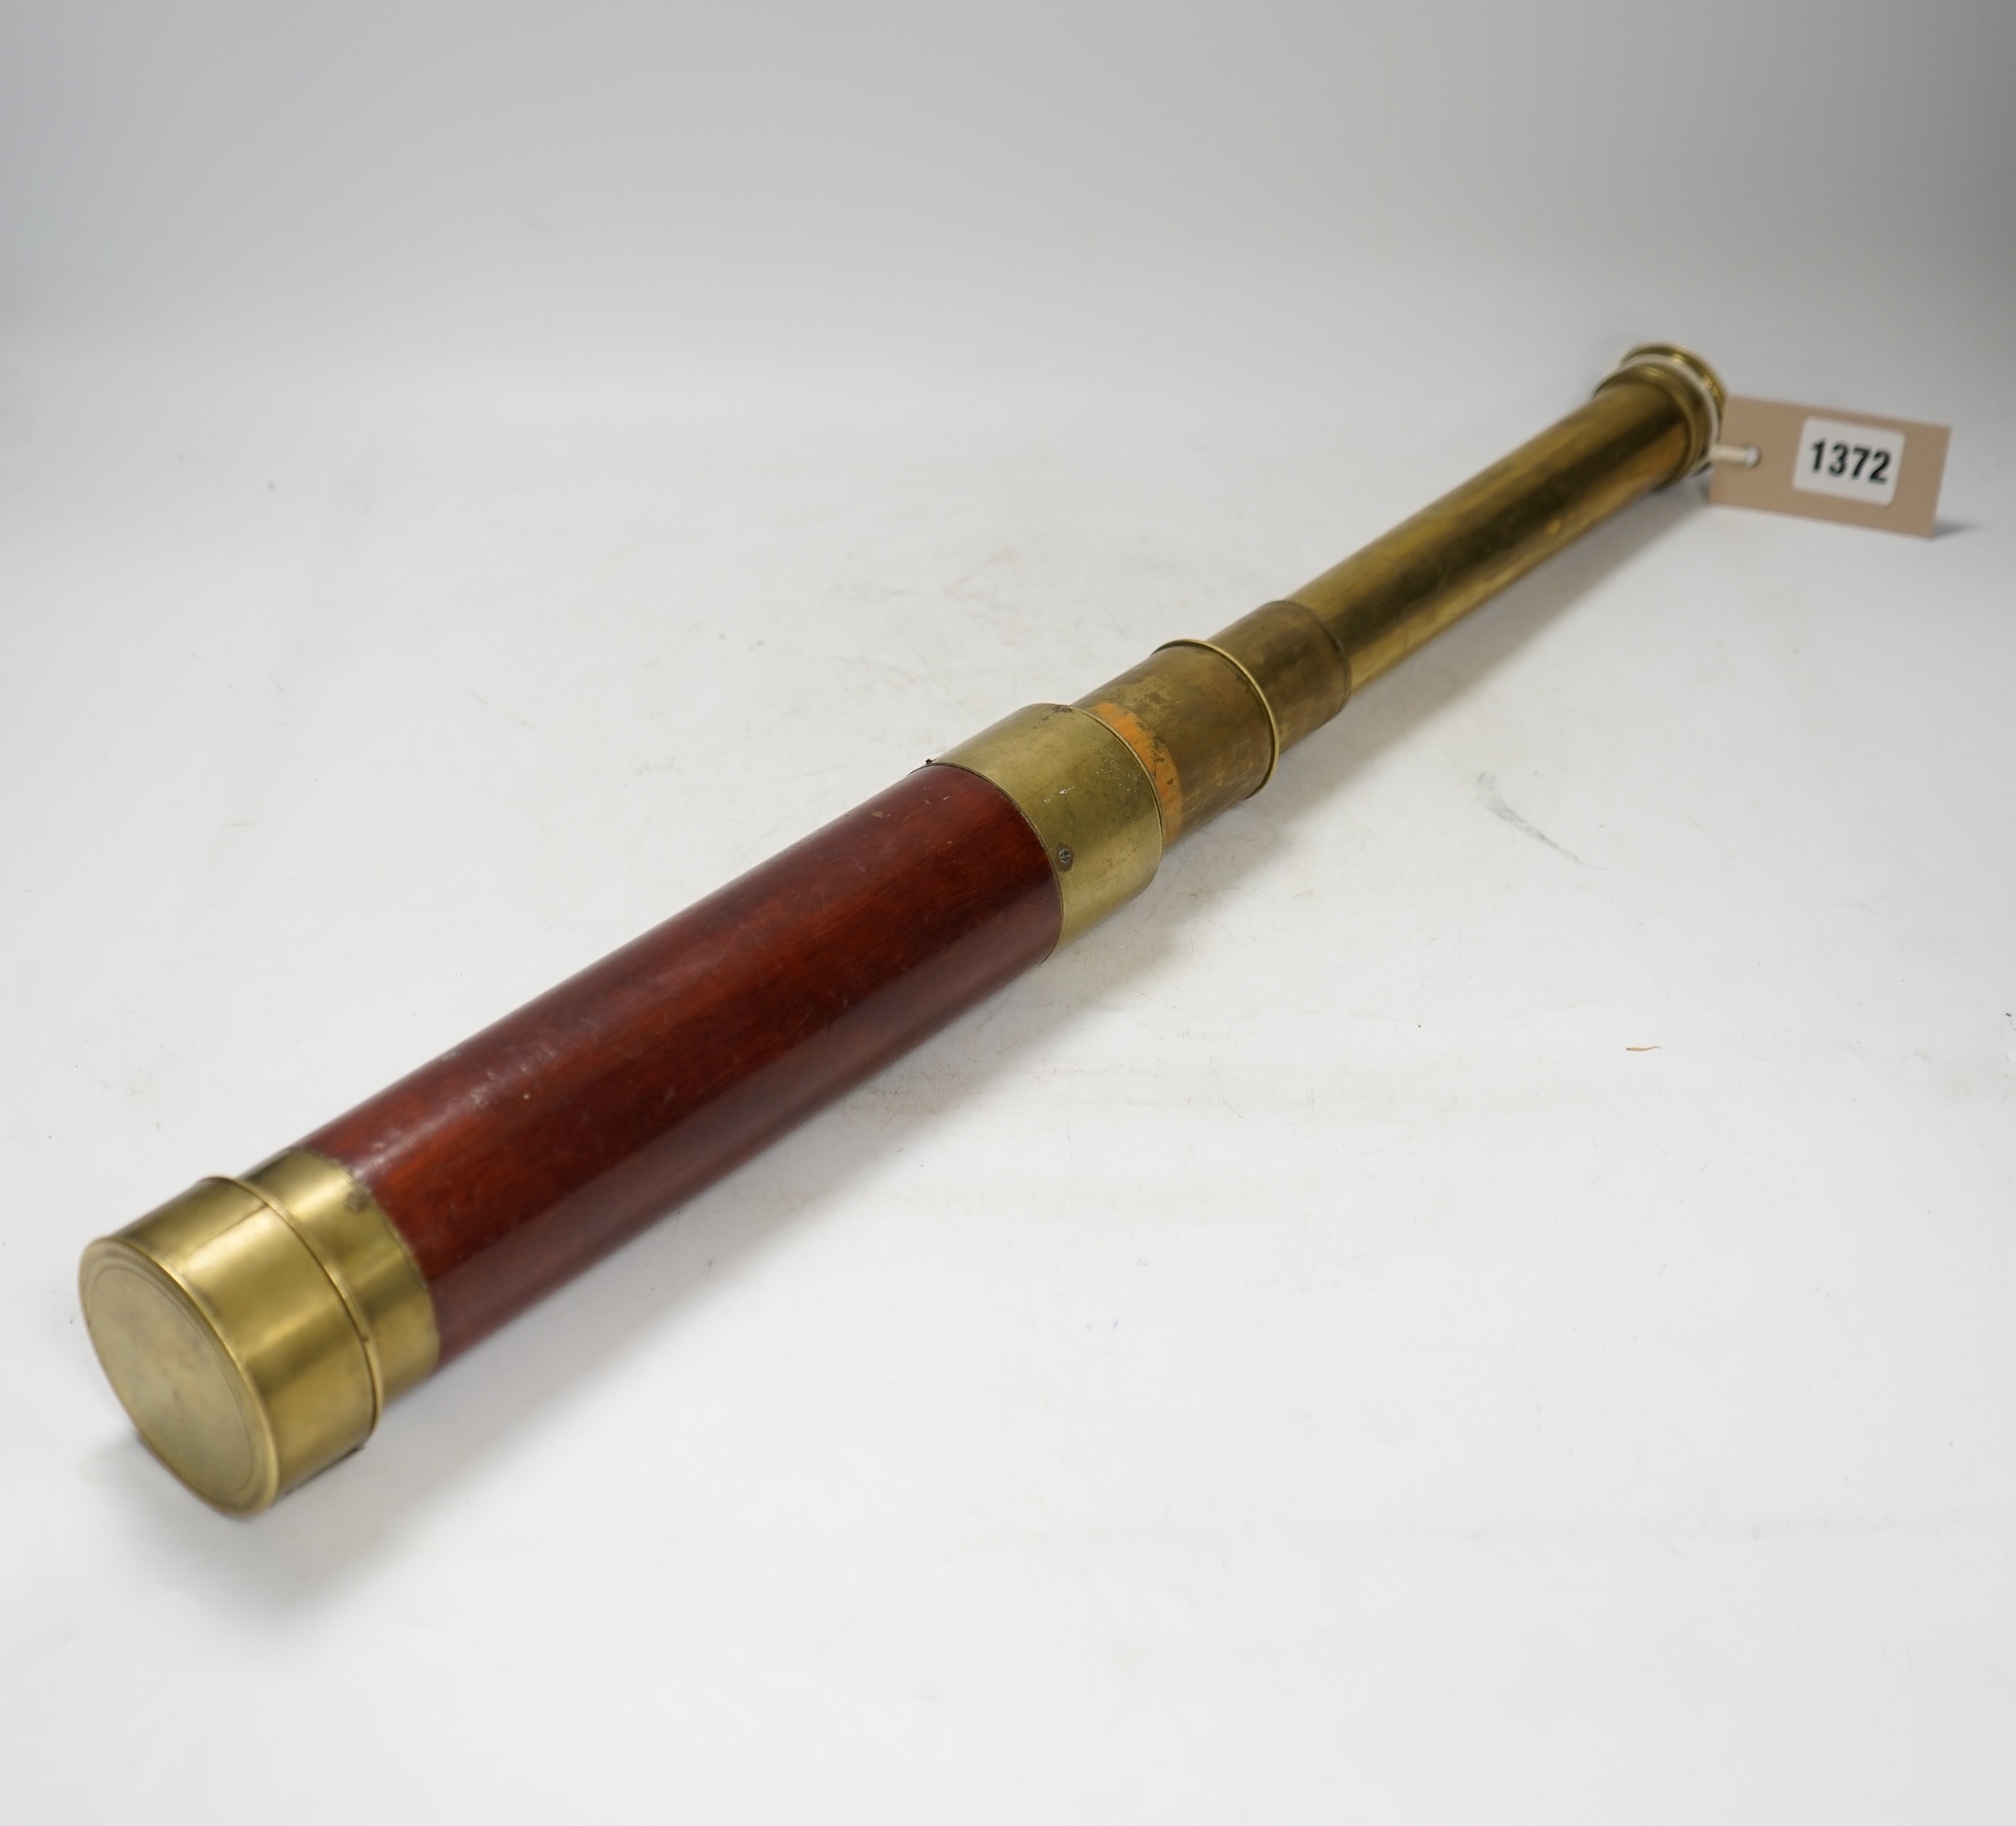 A 19th century four draw telescope made by J.P. Cutts of London. Condition - fair